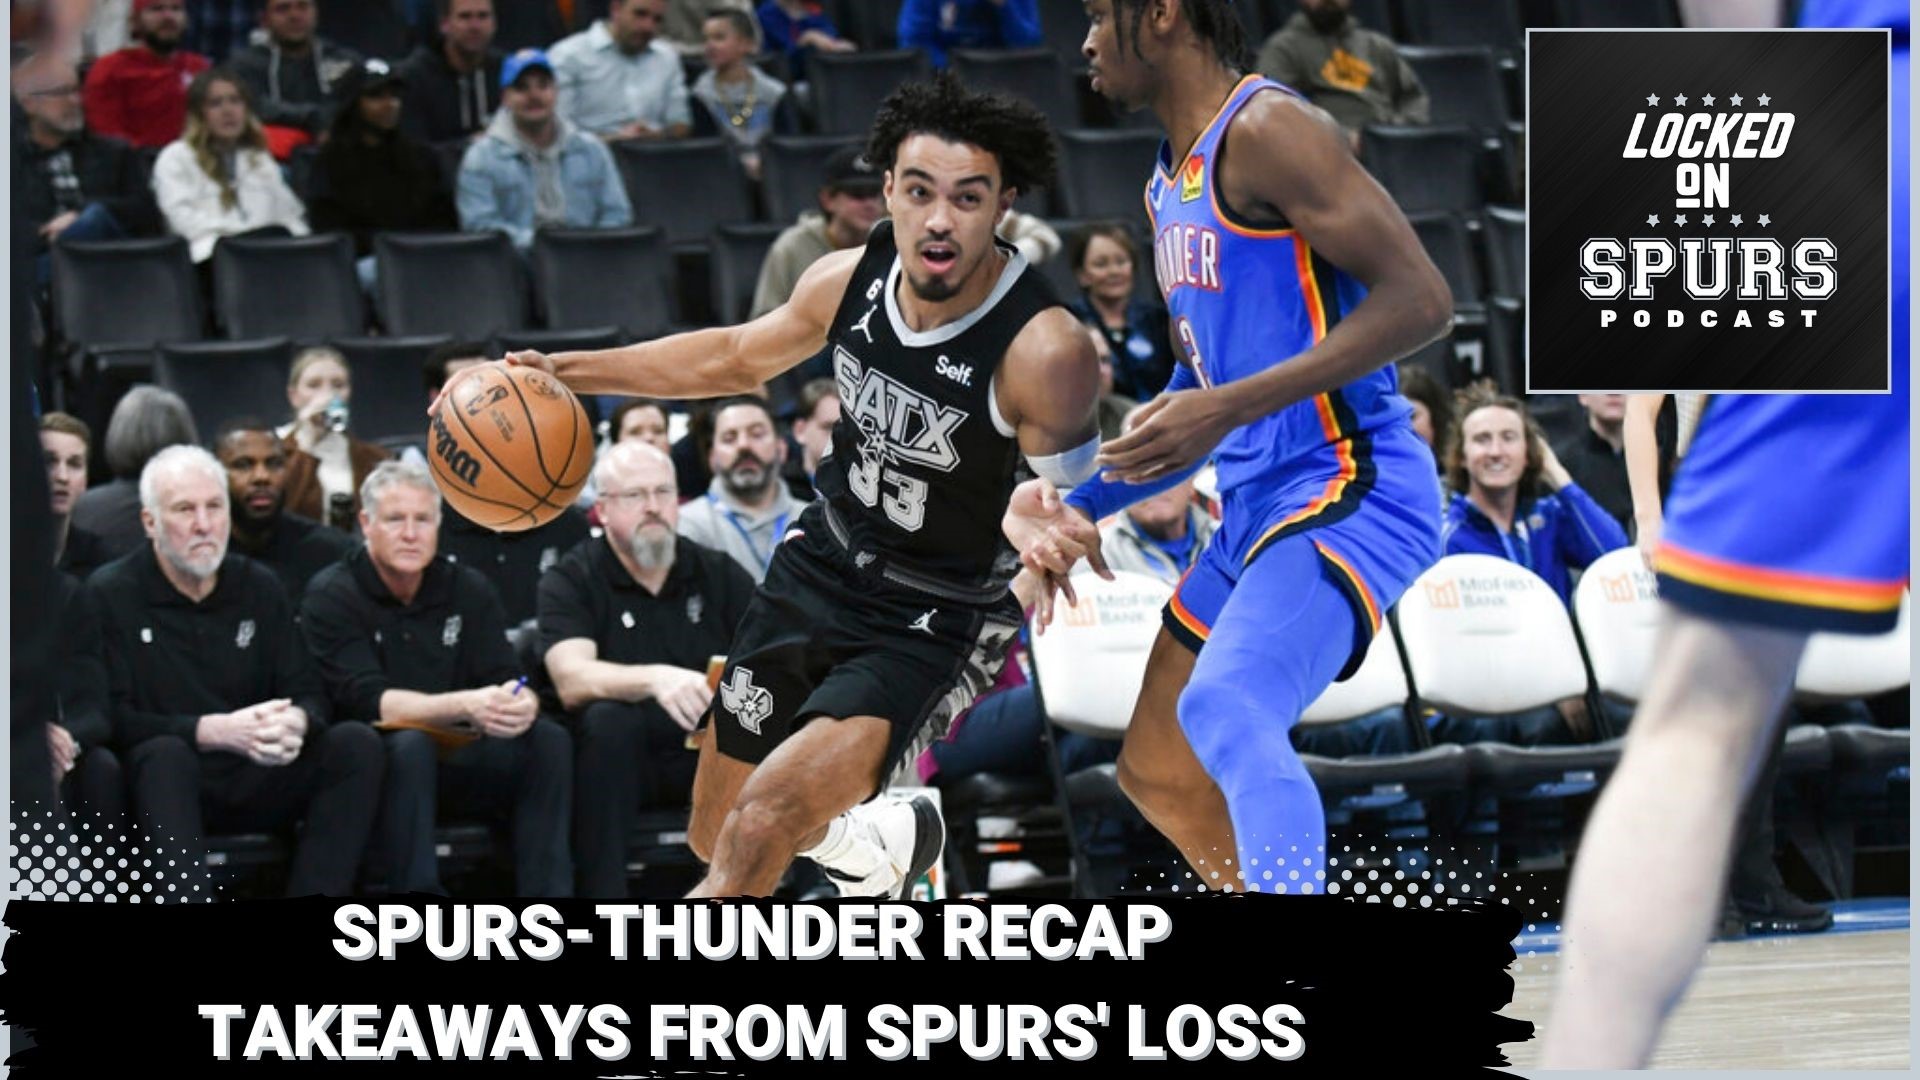 The Spurs fell apart late in the game versus The Thunder.